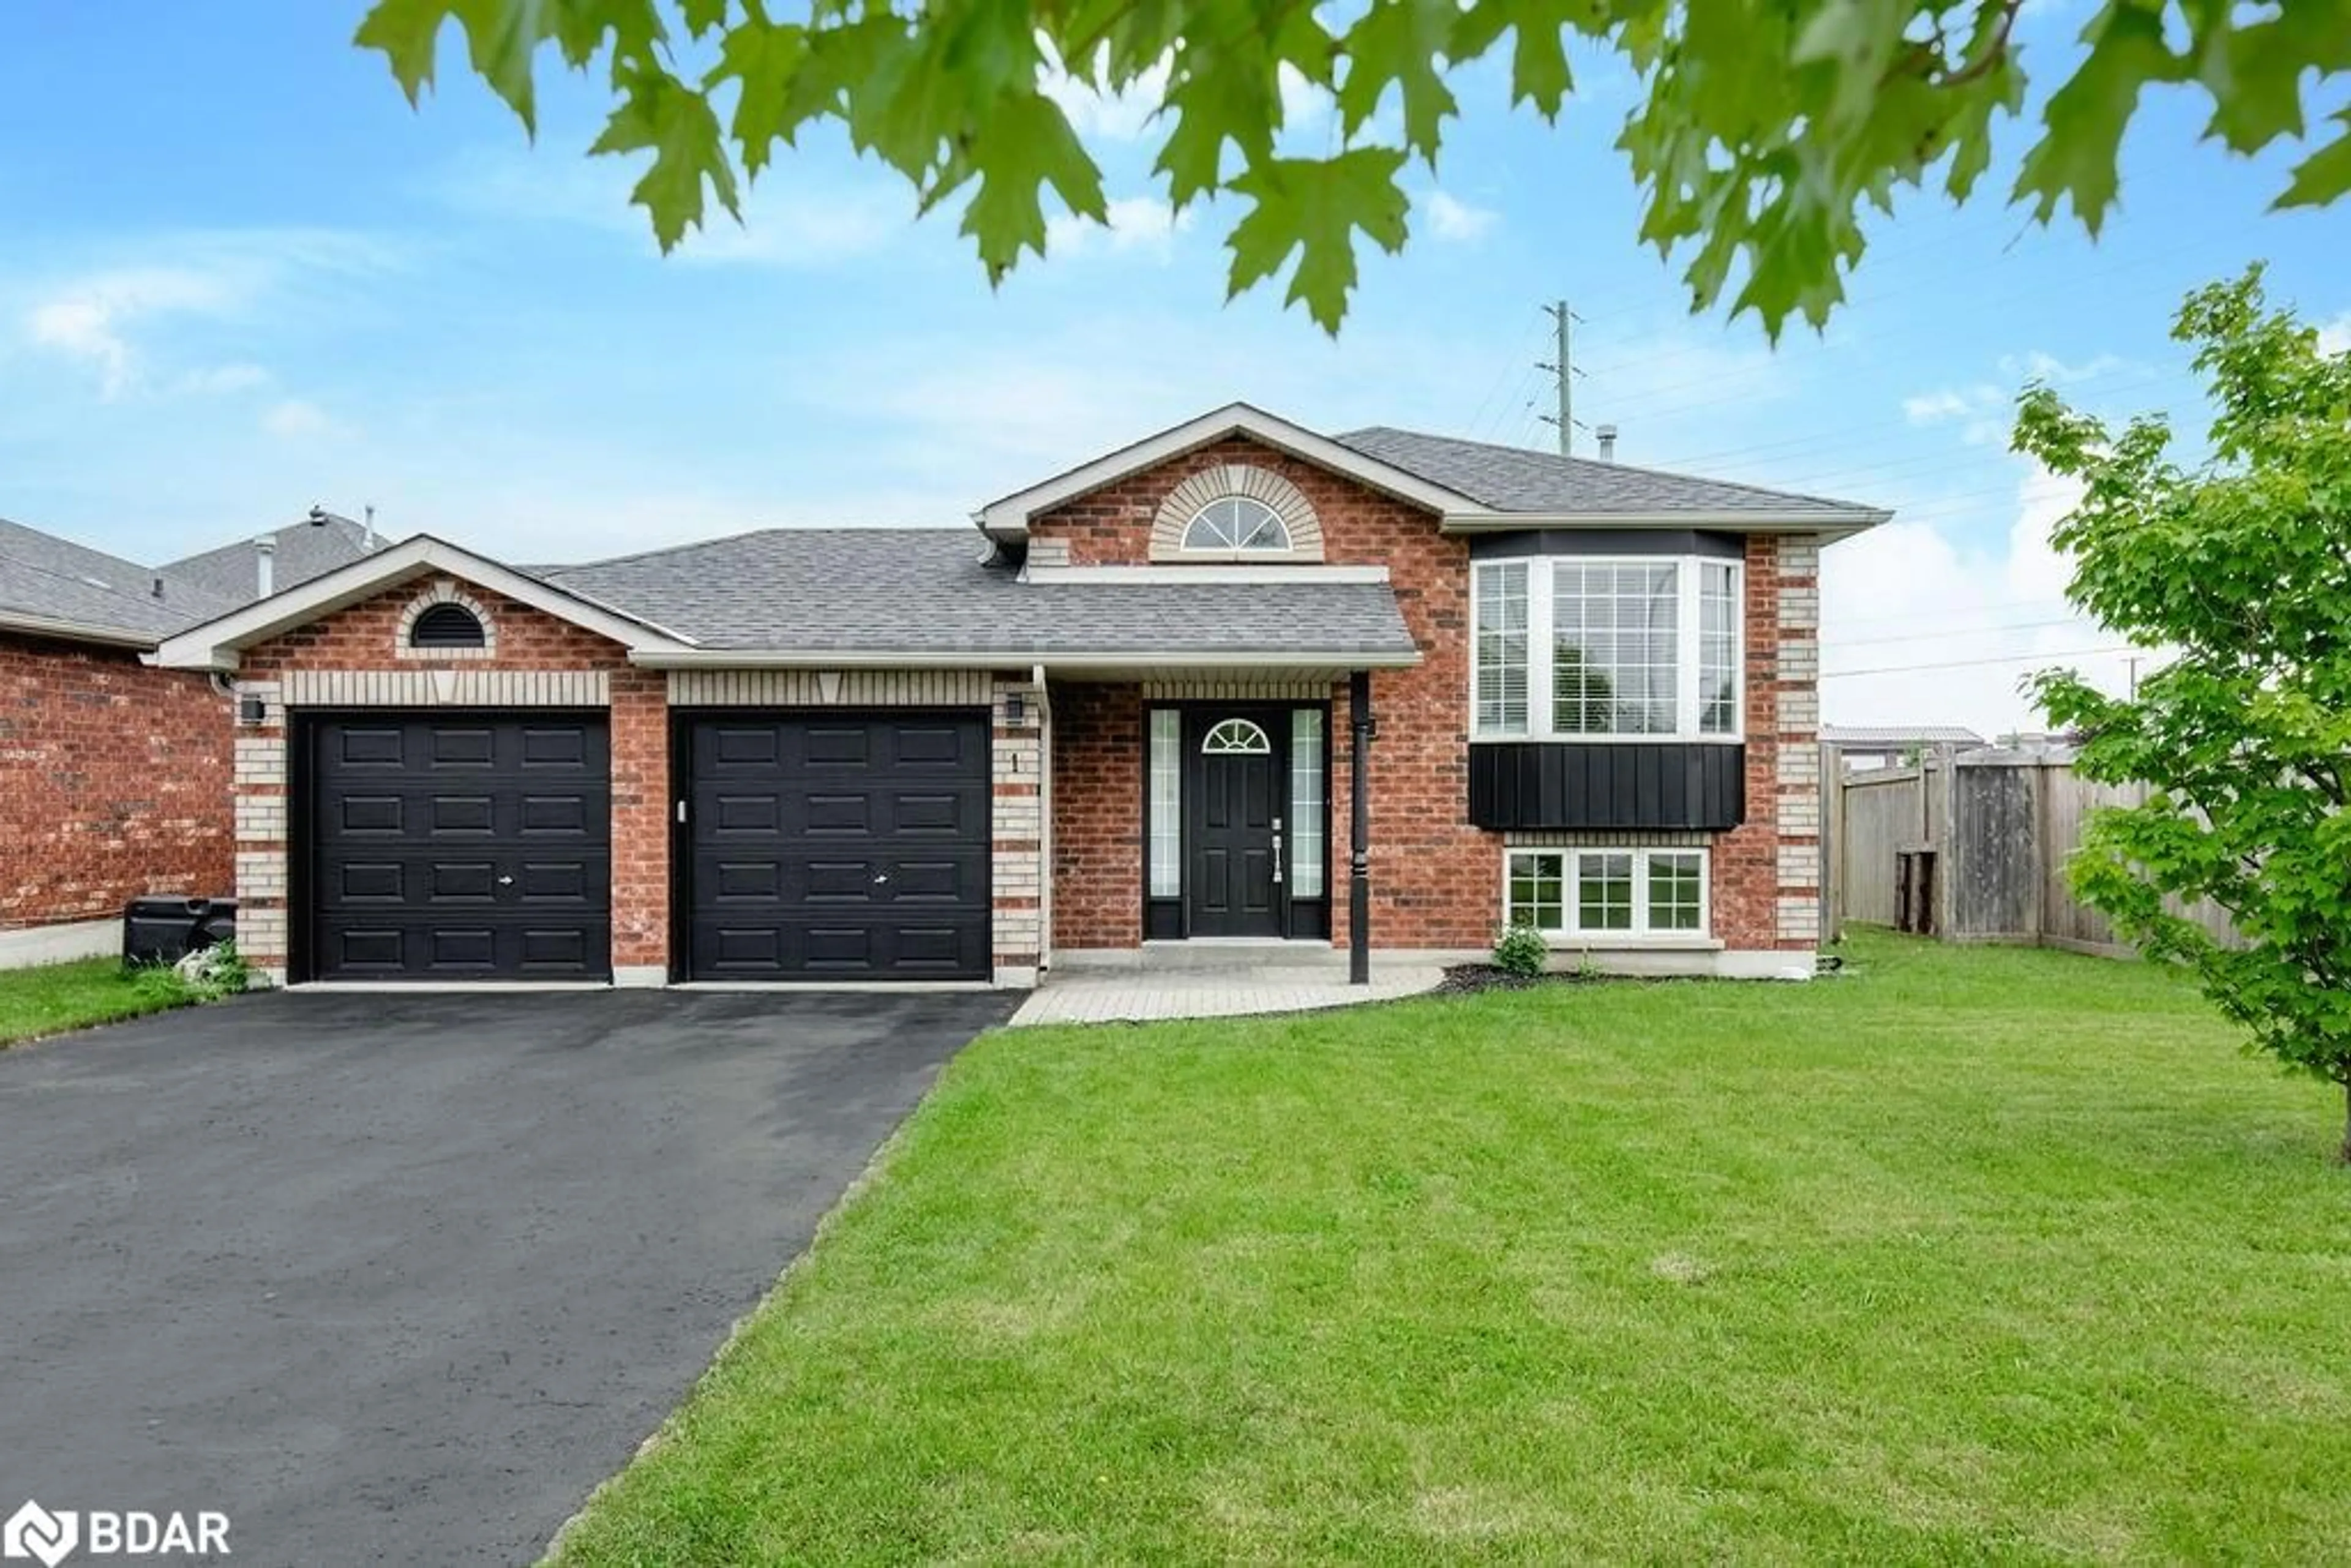 Home with brick exterior material for 1 Pacific Ave, Barrie Ontario L4M 7E7